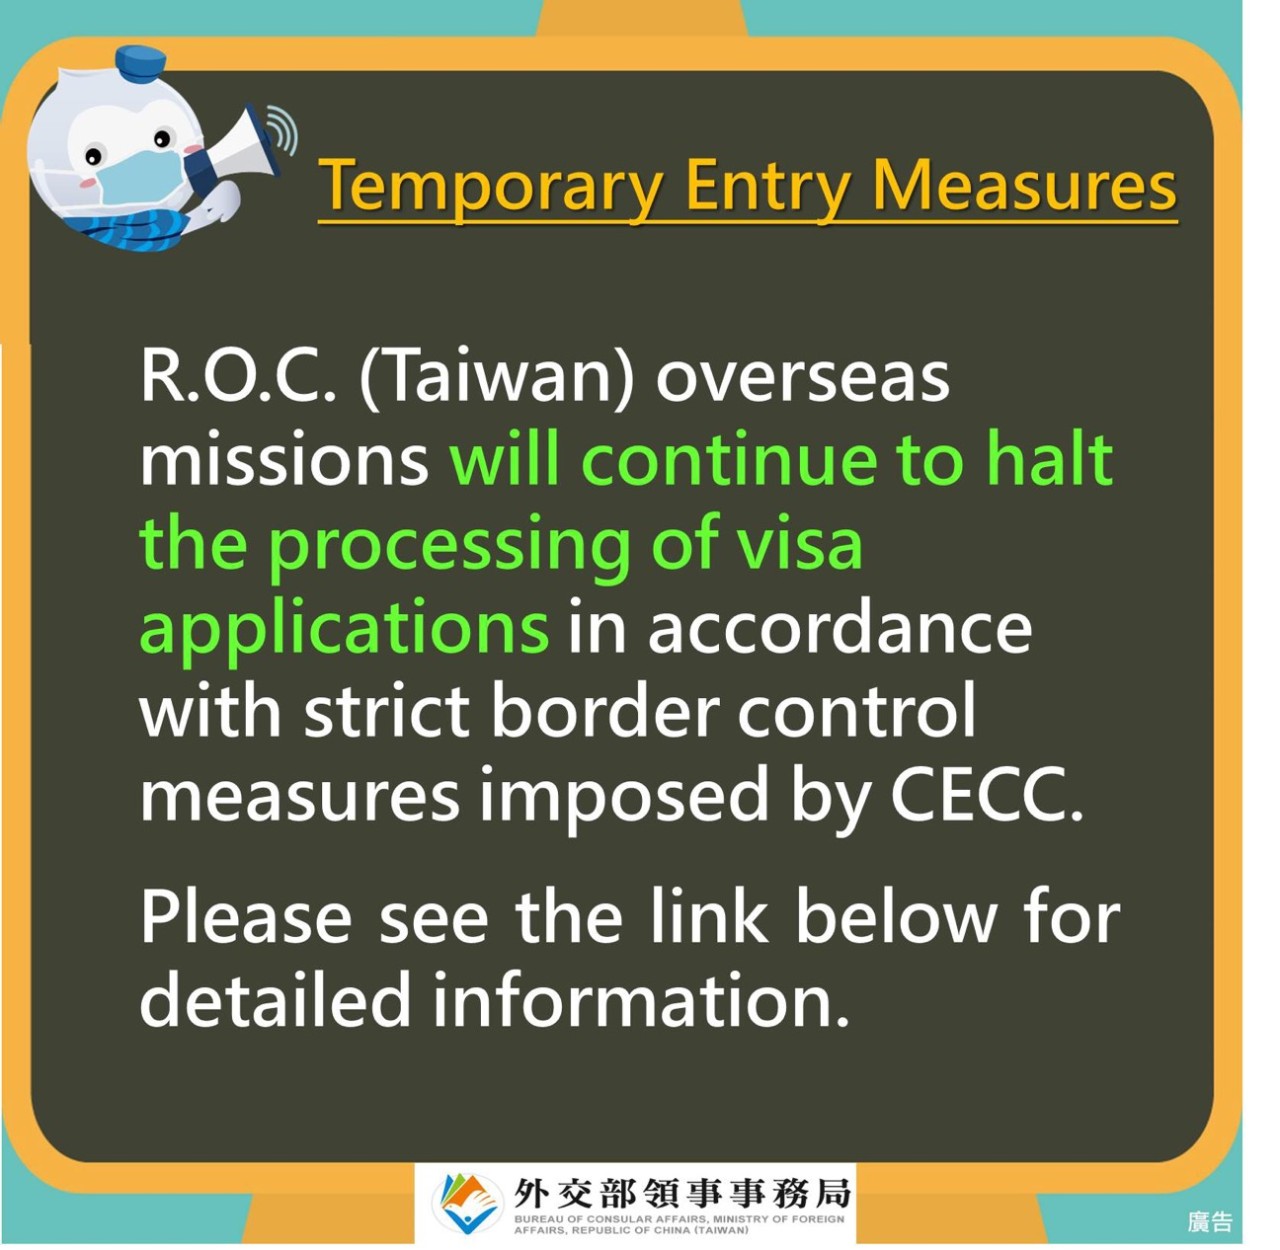 R.O.C. (Taiwan) overseas missions will continue to halt the processing of visa applications in accordance with strict border control measures imposed by the CECC. Photo/From Bureau of Consular Affairs, MOFA